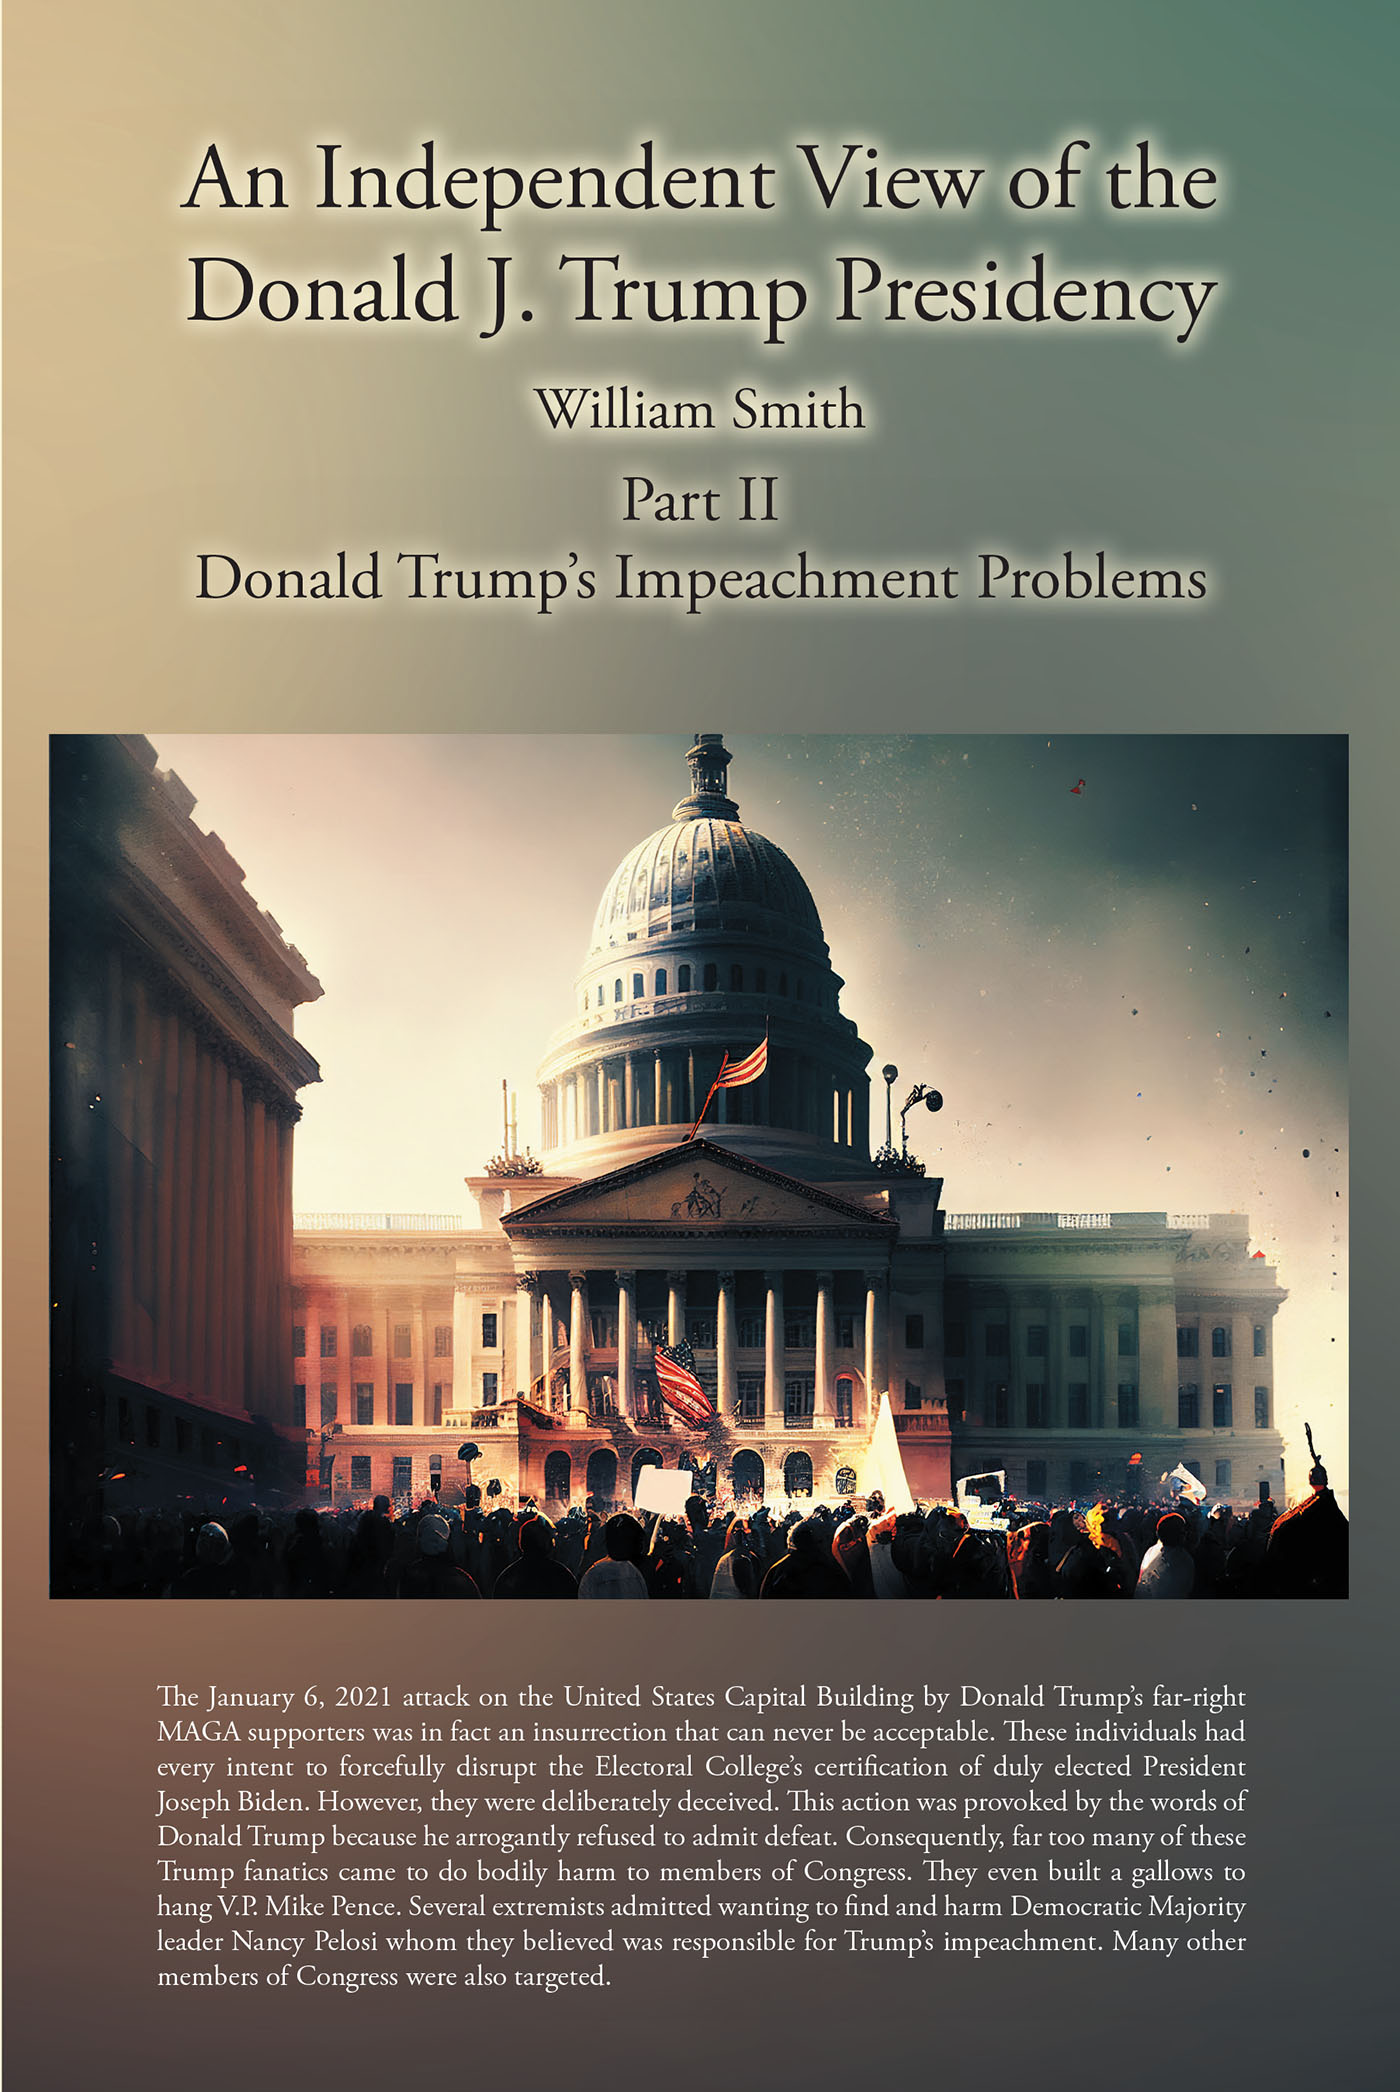 Author William Smith’s New Book, “An Independent View of the Donald J. Trump Presidency: Part II Donald Trump's Impeachment Problems,” is Released